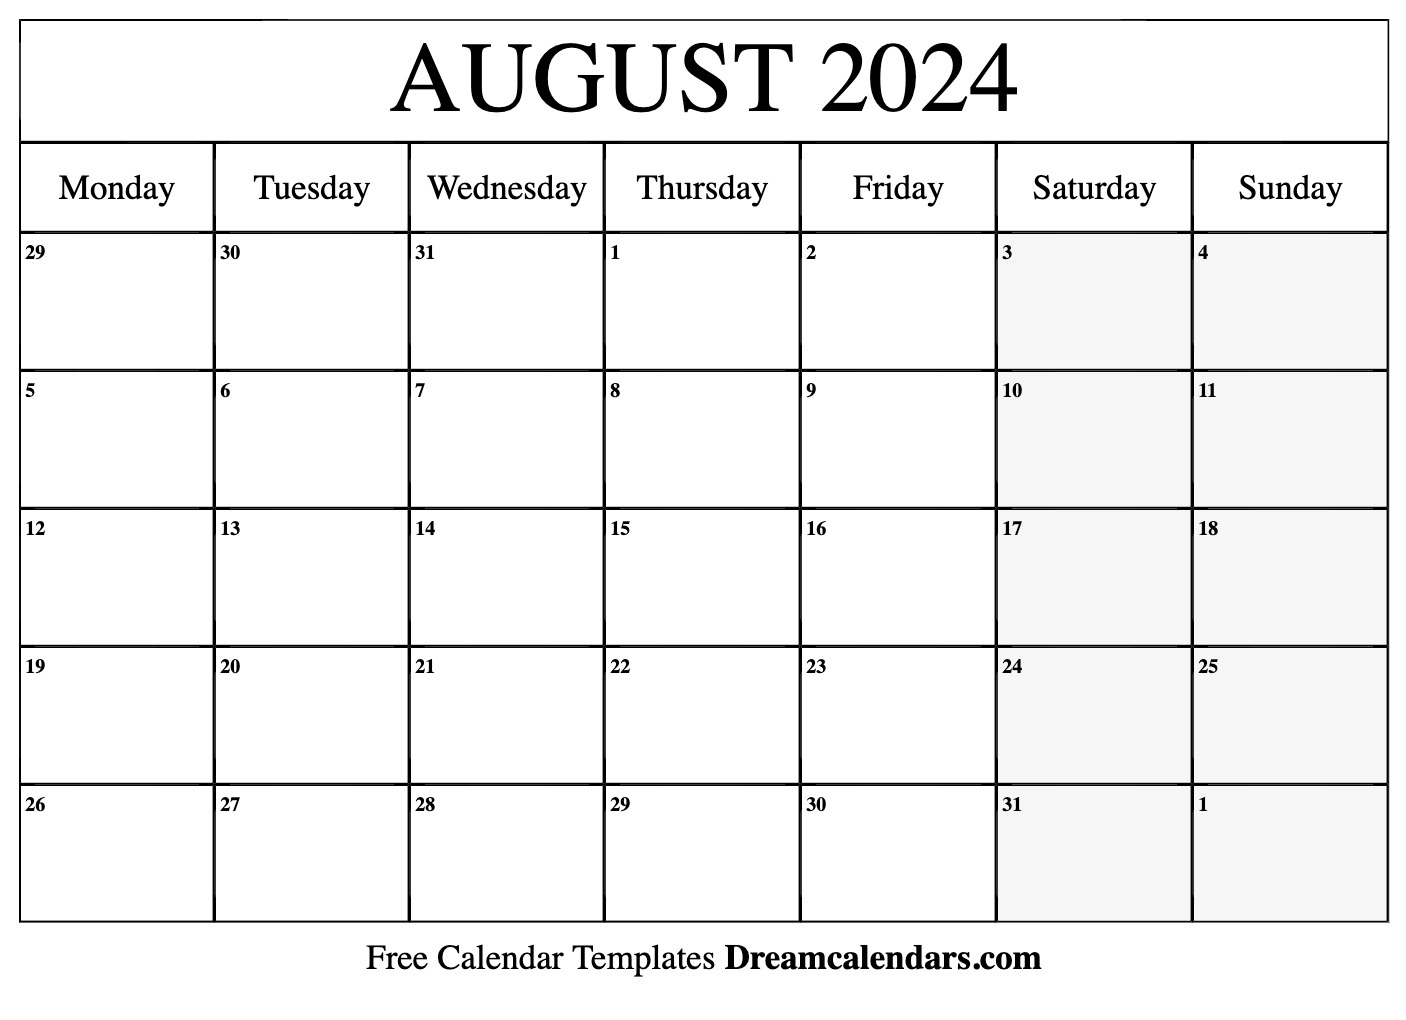 August 2024 Calendar | Free Blank Printable With Holidays regarding Free Printable August 2024 Blank Calendar